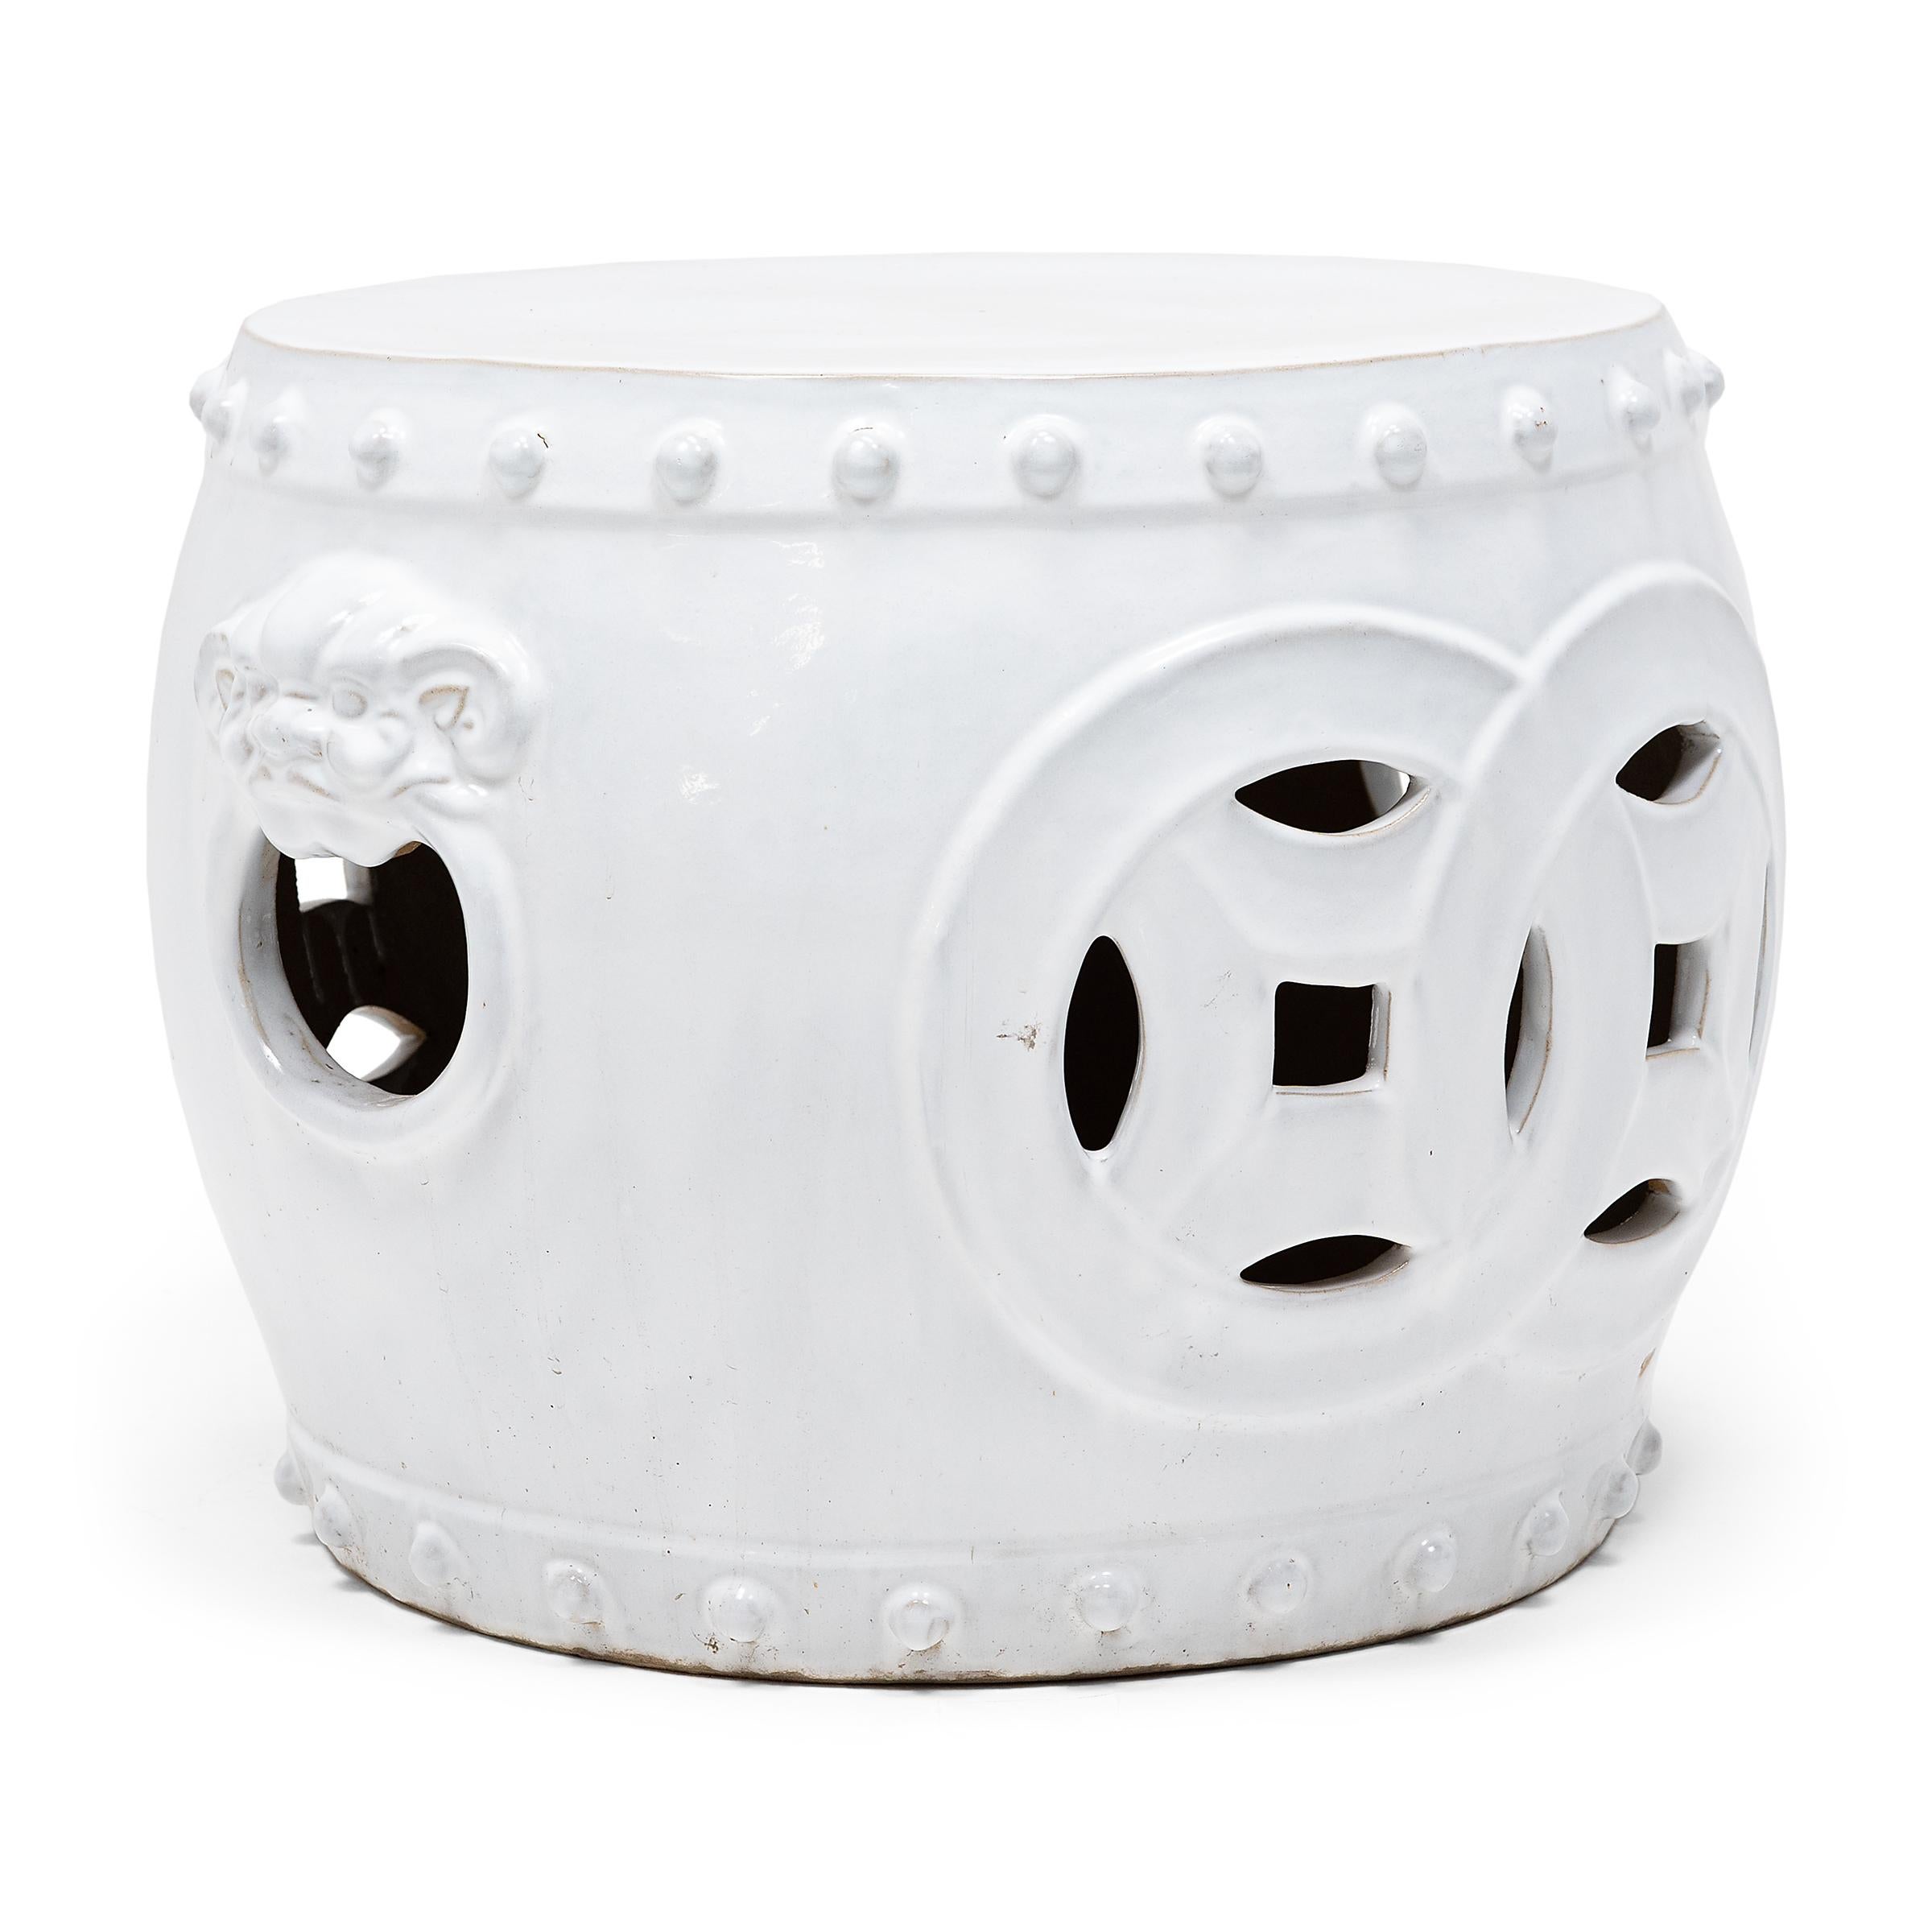 This unusually proportioned ceramic table is a modern interpretation of the classic Chinese drum-form garden stool. Cloaked in a pristine, monochrome white glaze, the wide stool is decorated with bands of imitation nails, fu dog handles, and a